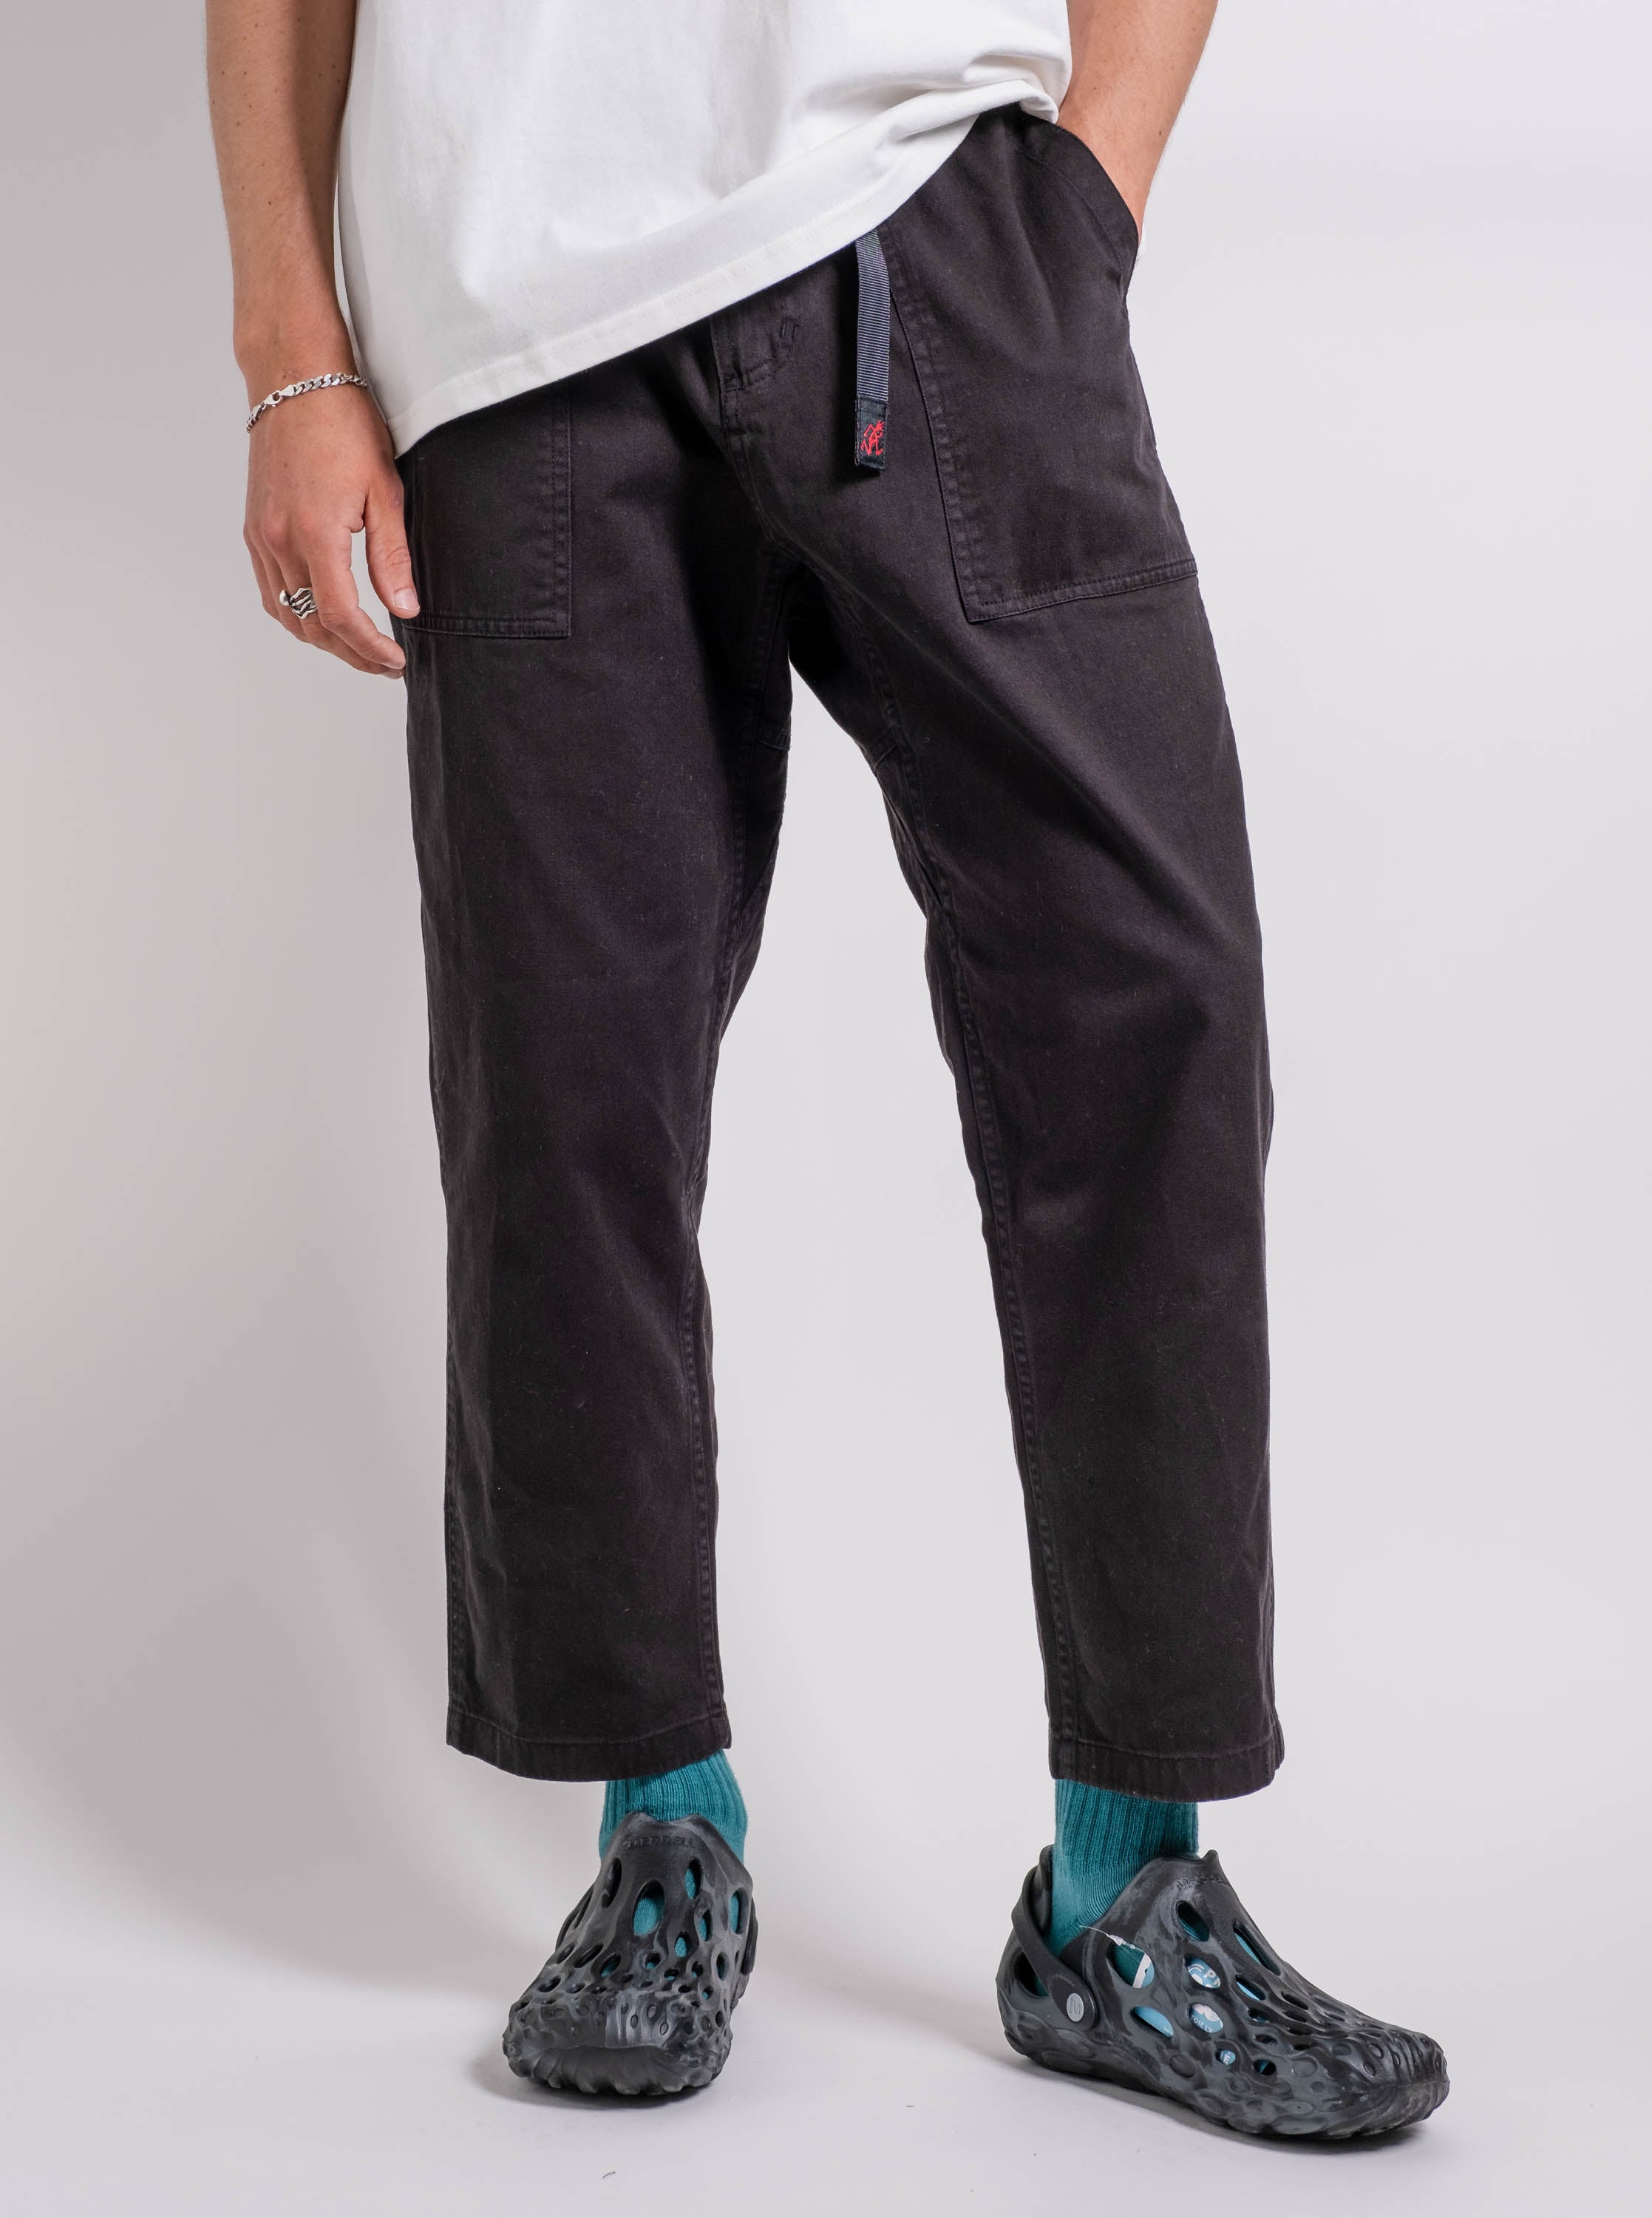 Gramicci NN Pants - Double Navy – The 5th Store